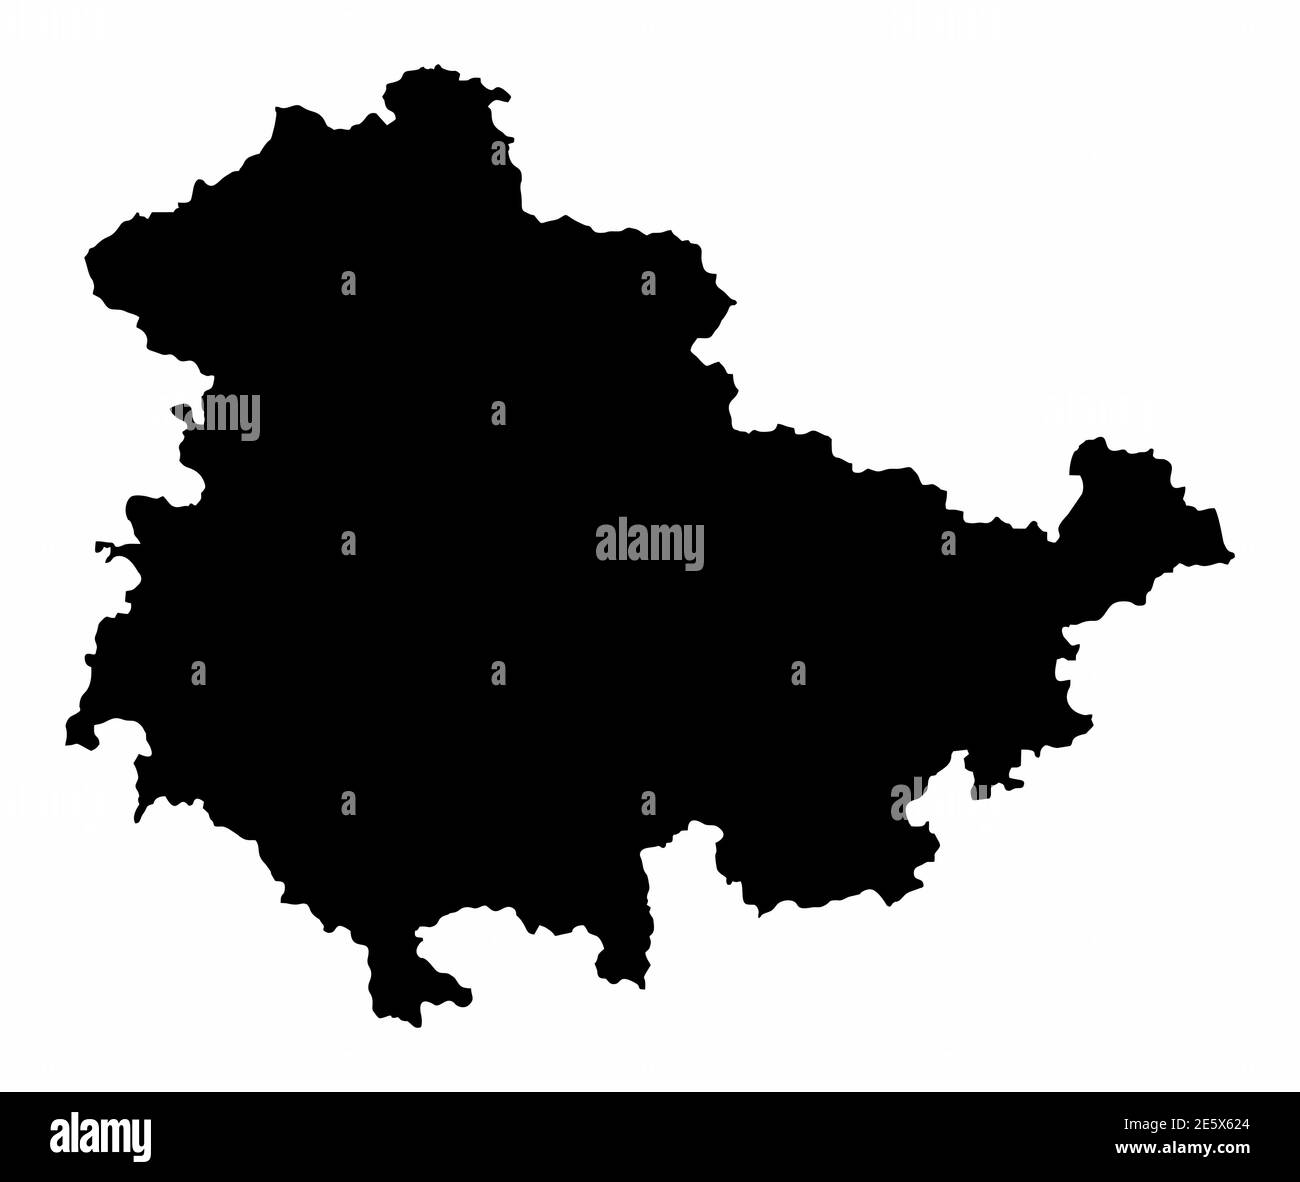 Thuringia silhouette map Stock Vector